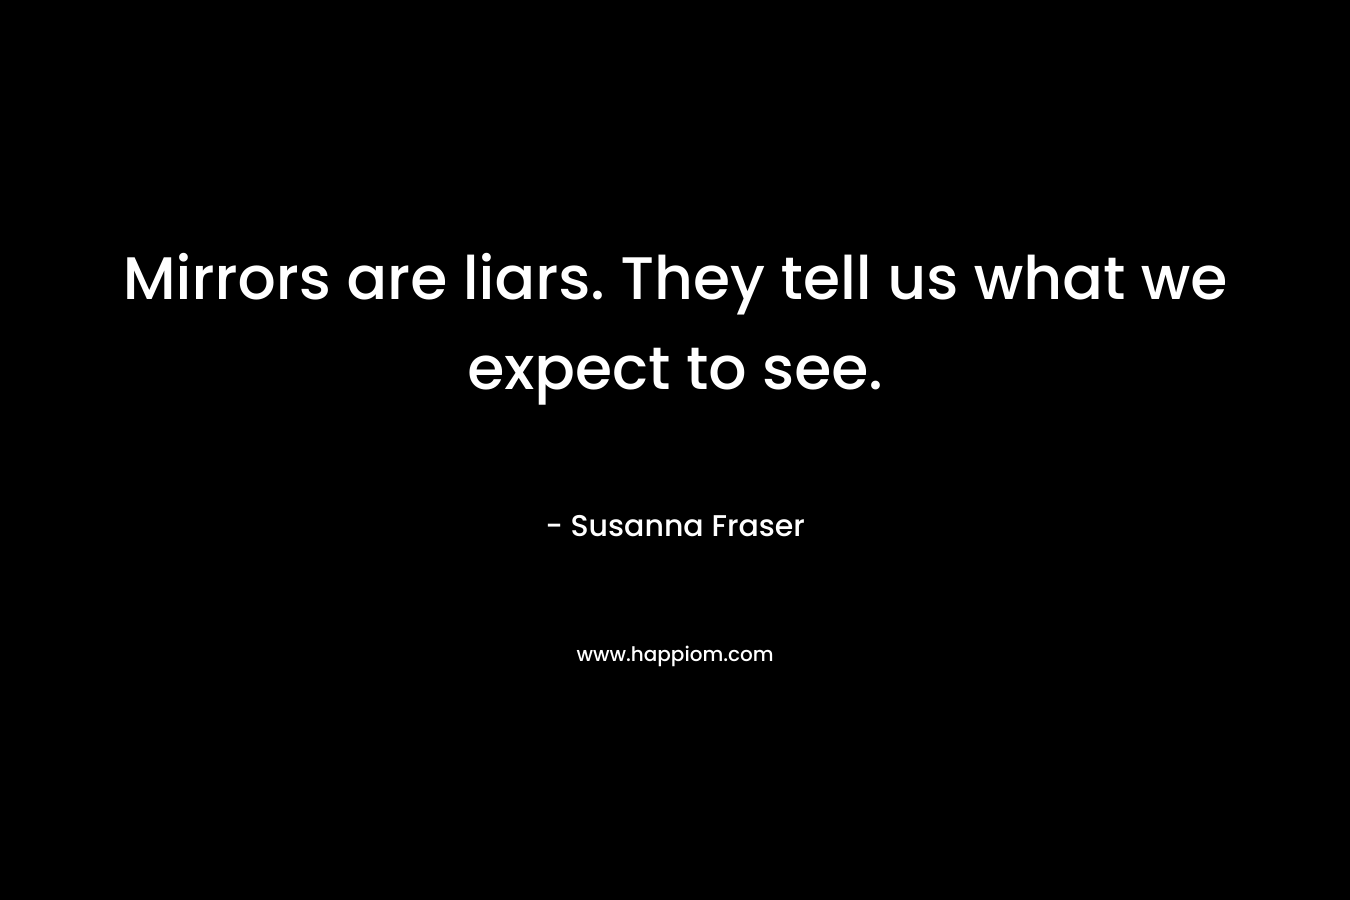 Mirrors are liars. They tell us what we expect to see. – Susanna Fraser